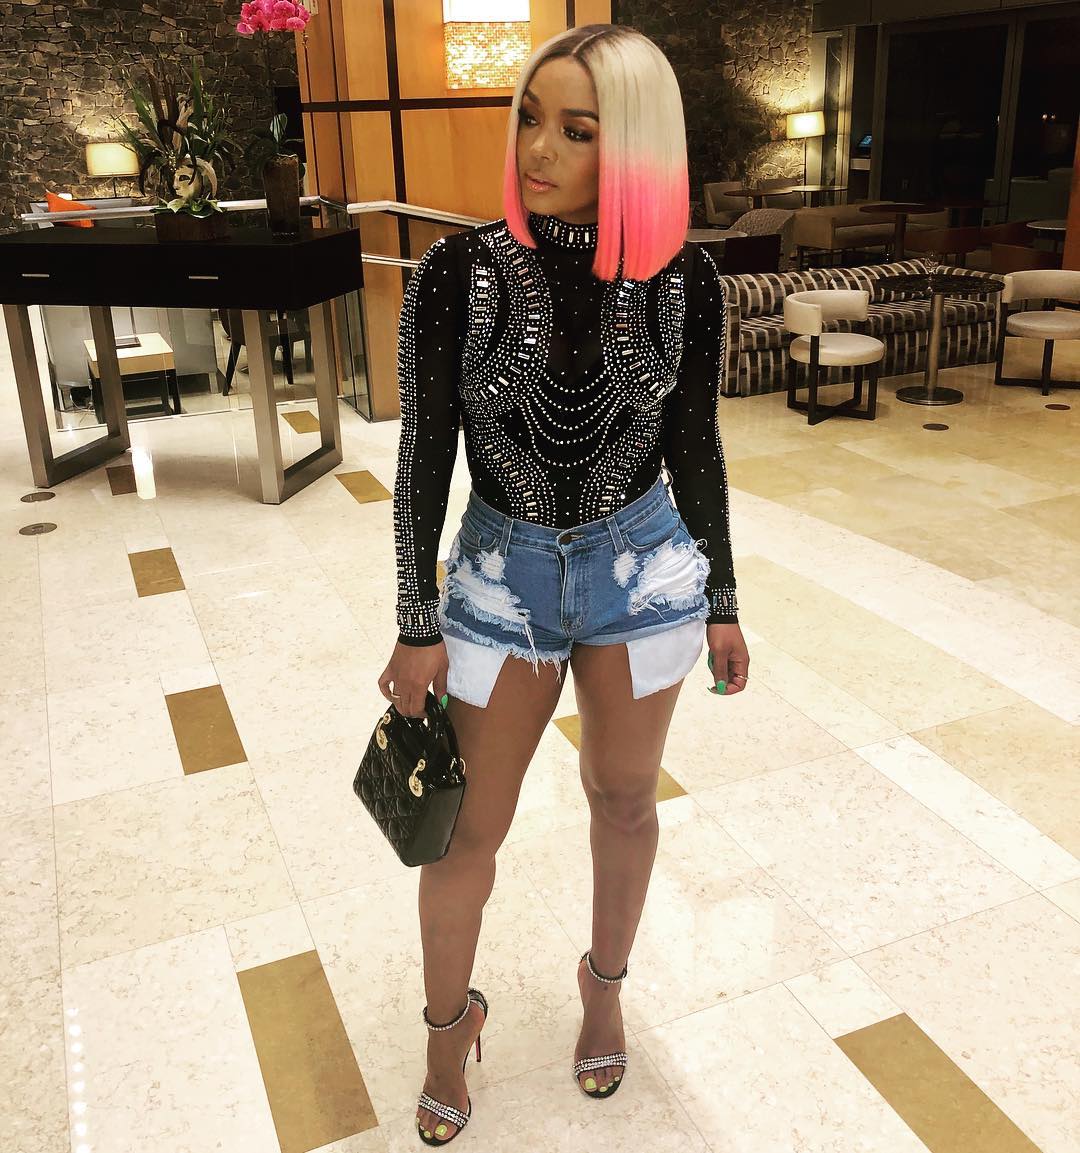 rasheeda-frost-shares-a-video-about-dealing-with-the-upper-body-fat